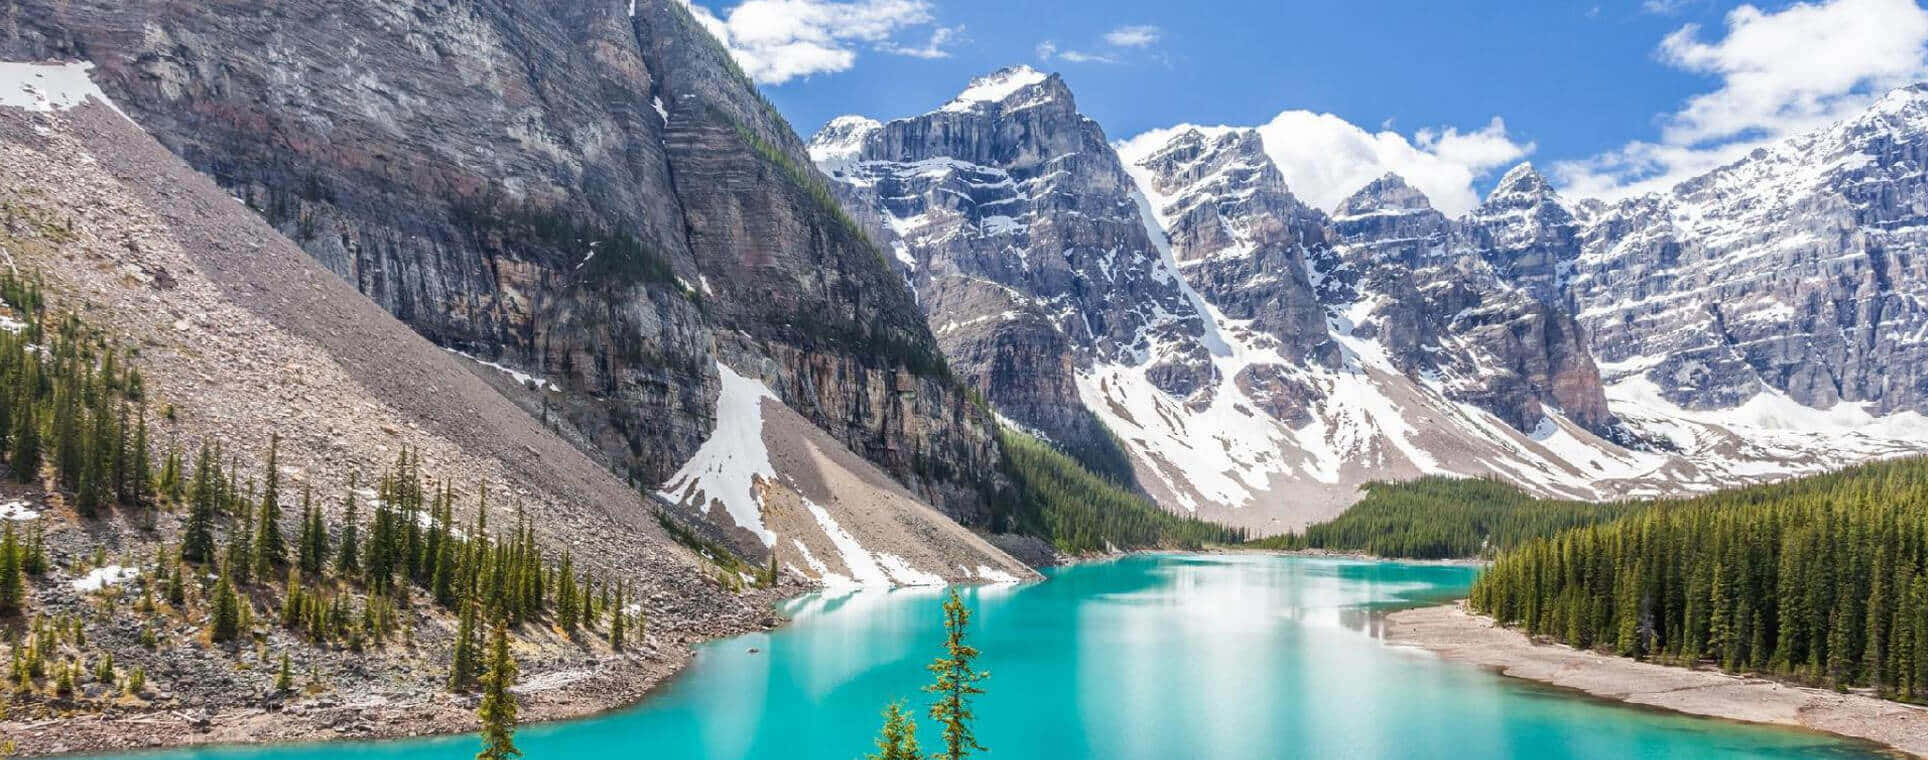 Explore The Natural Beauty of Canada